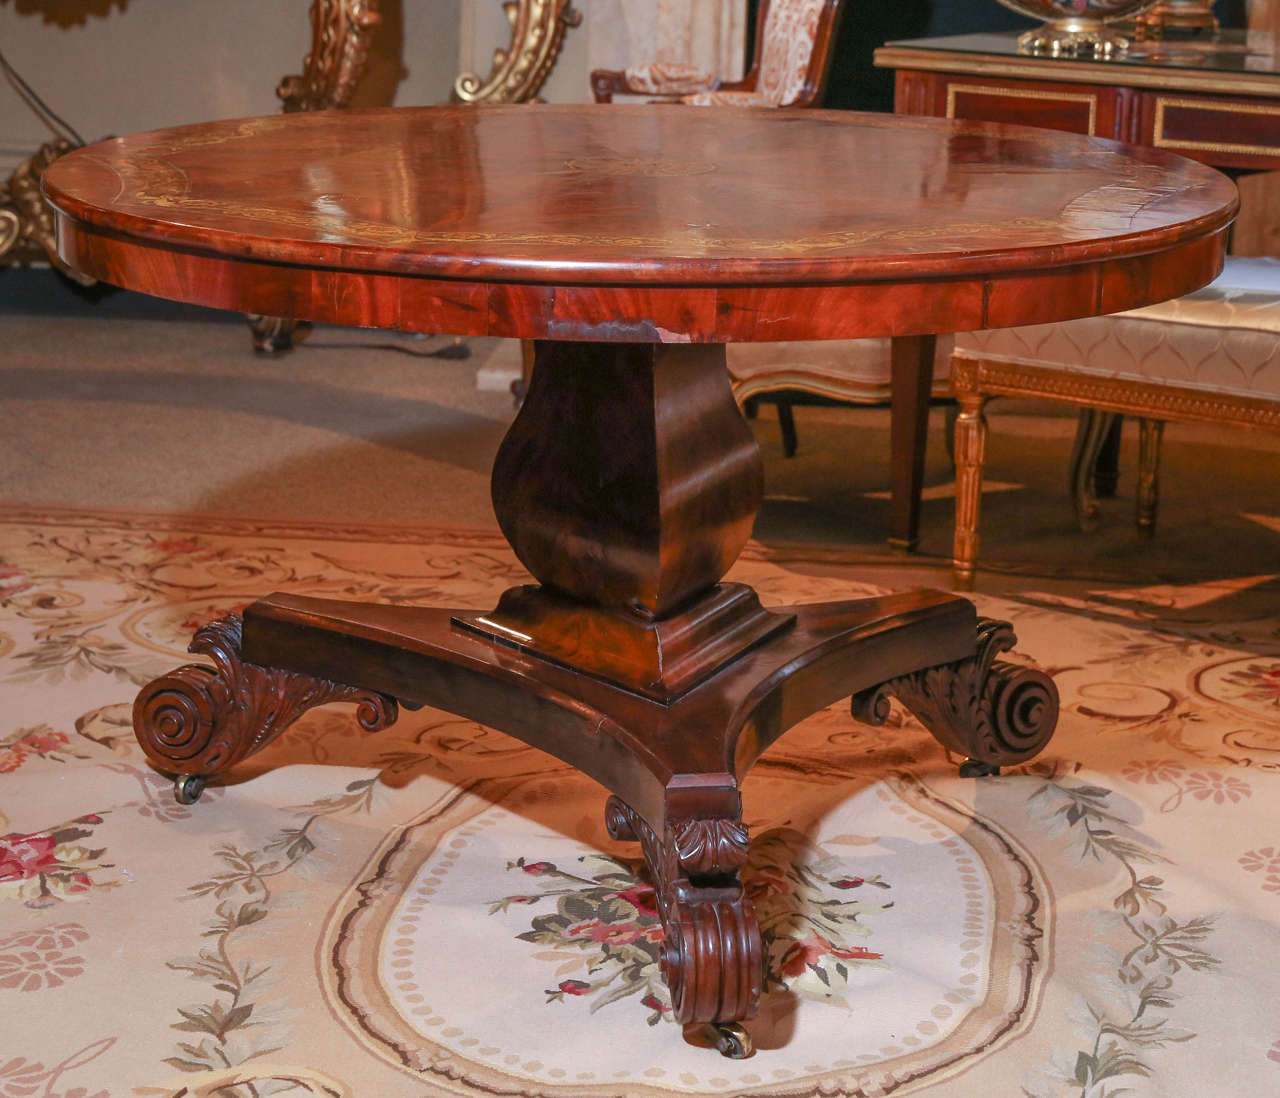 Circular center table
Flame mahogany
Tilt top
Fan shaped veneers in a beautiful pattern
Decorated with gilt stenciled designs